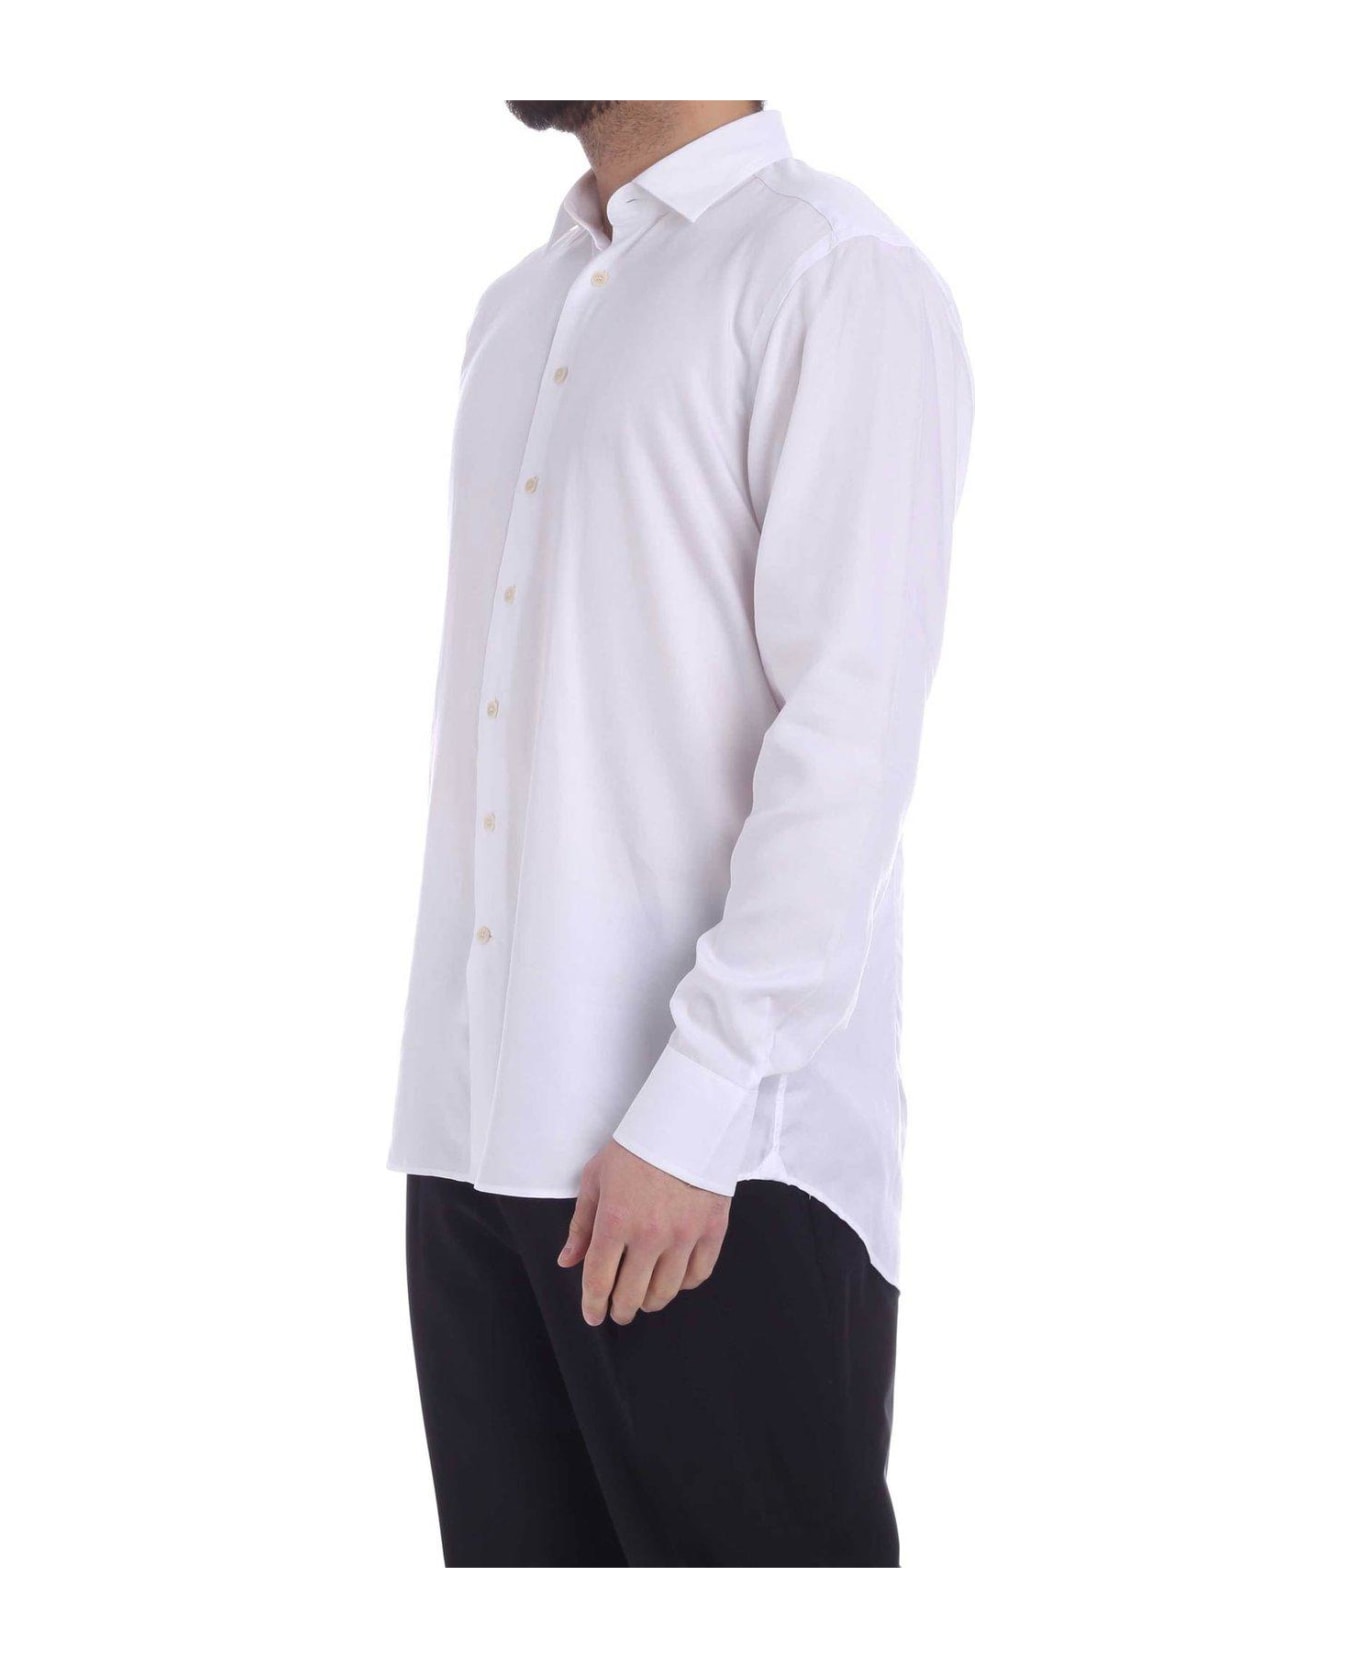 Etro Buttoned-up Long-sleeved Shirt - Bianco シャツ